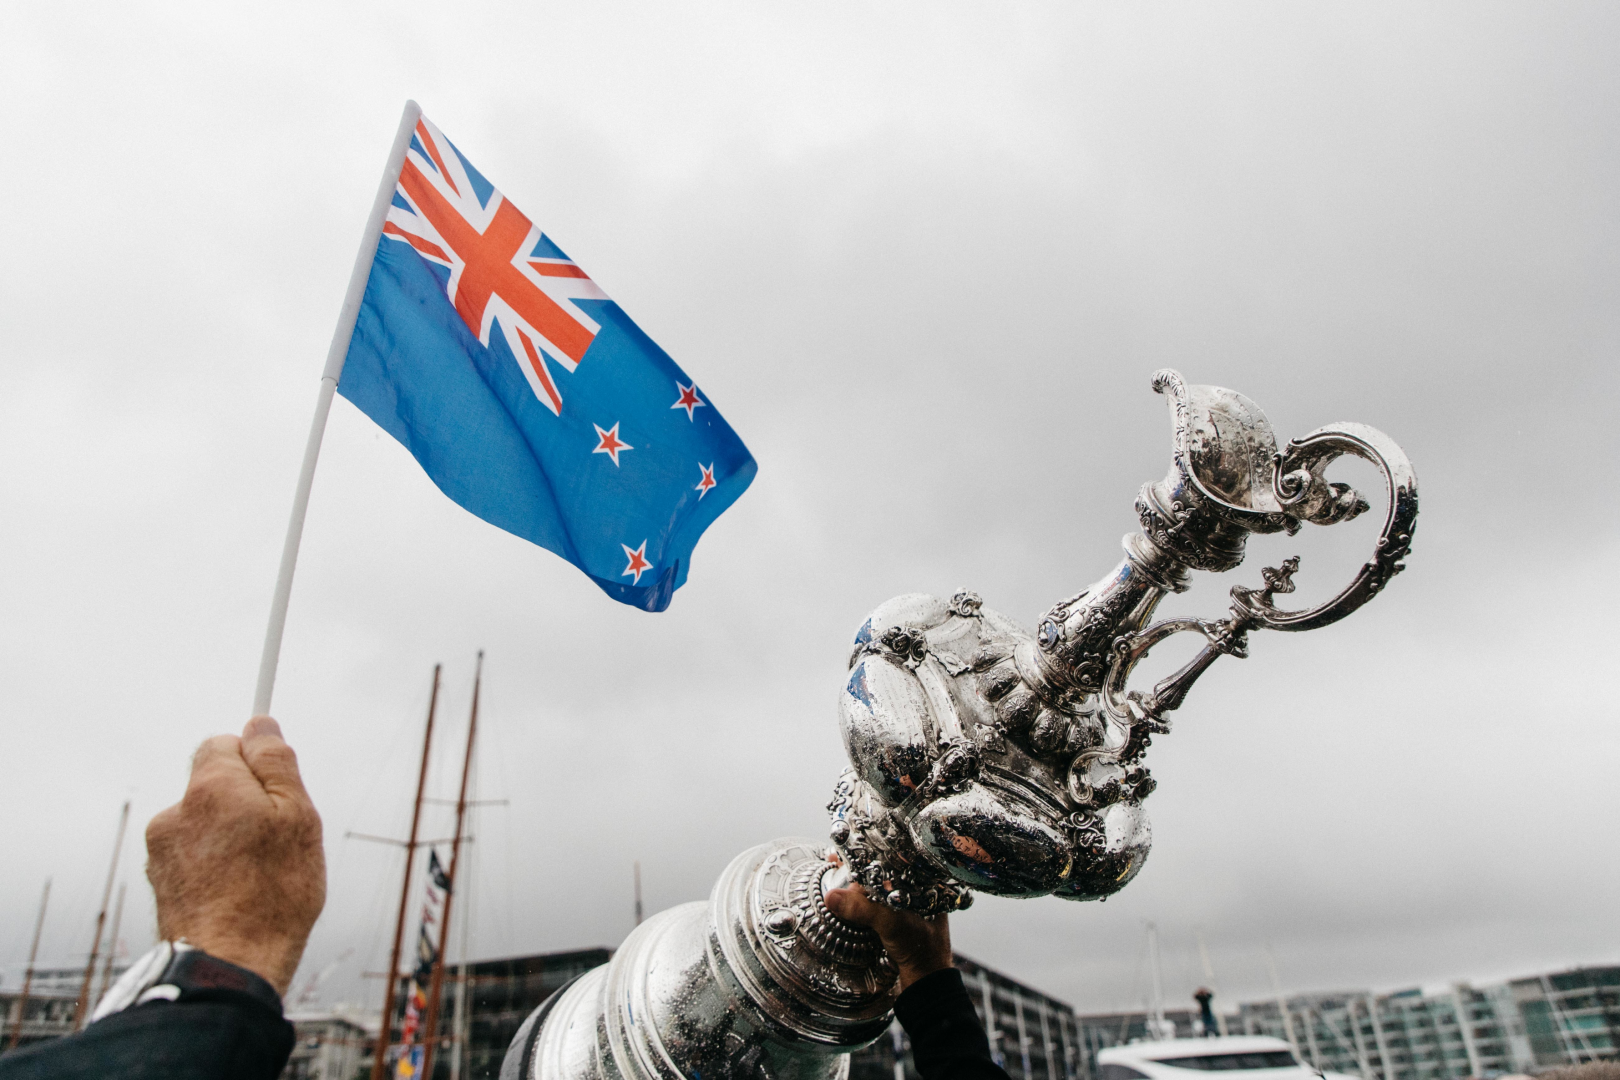 36th America’s Cup, Auckland confirmed as host venue in March 2021